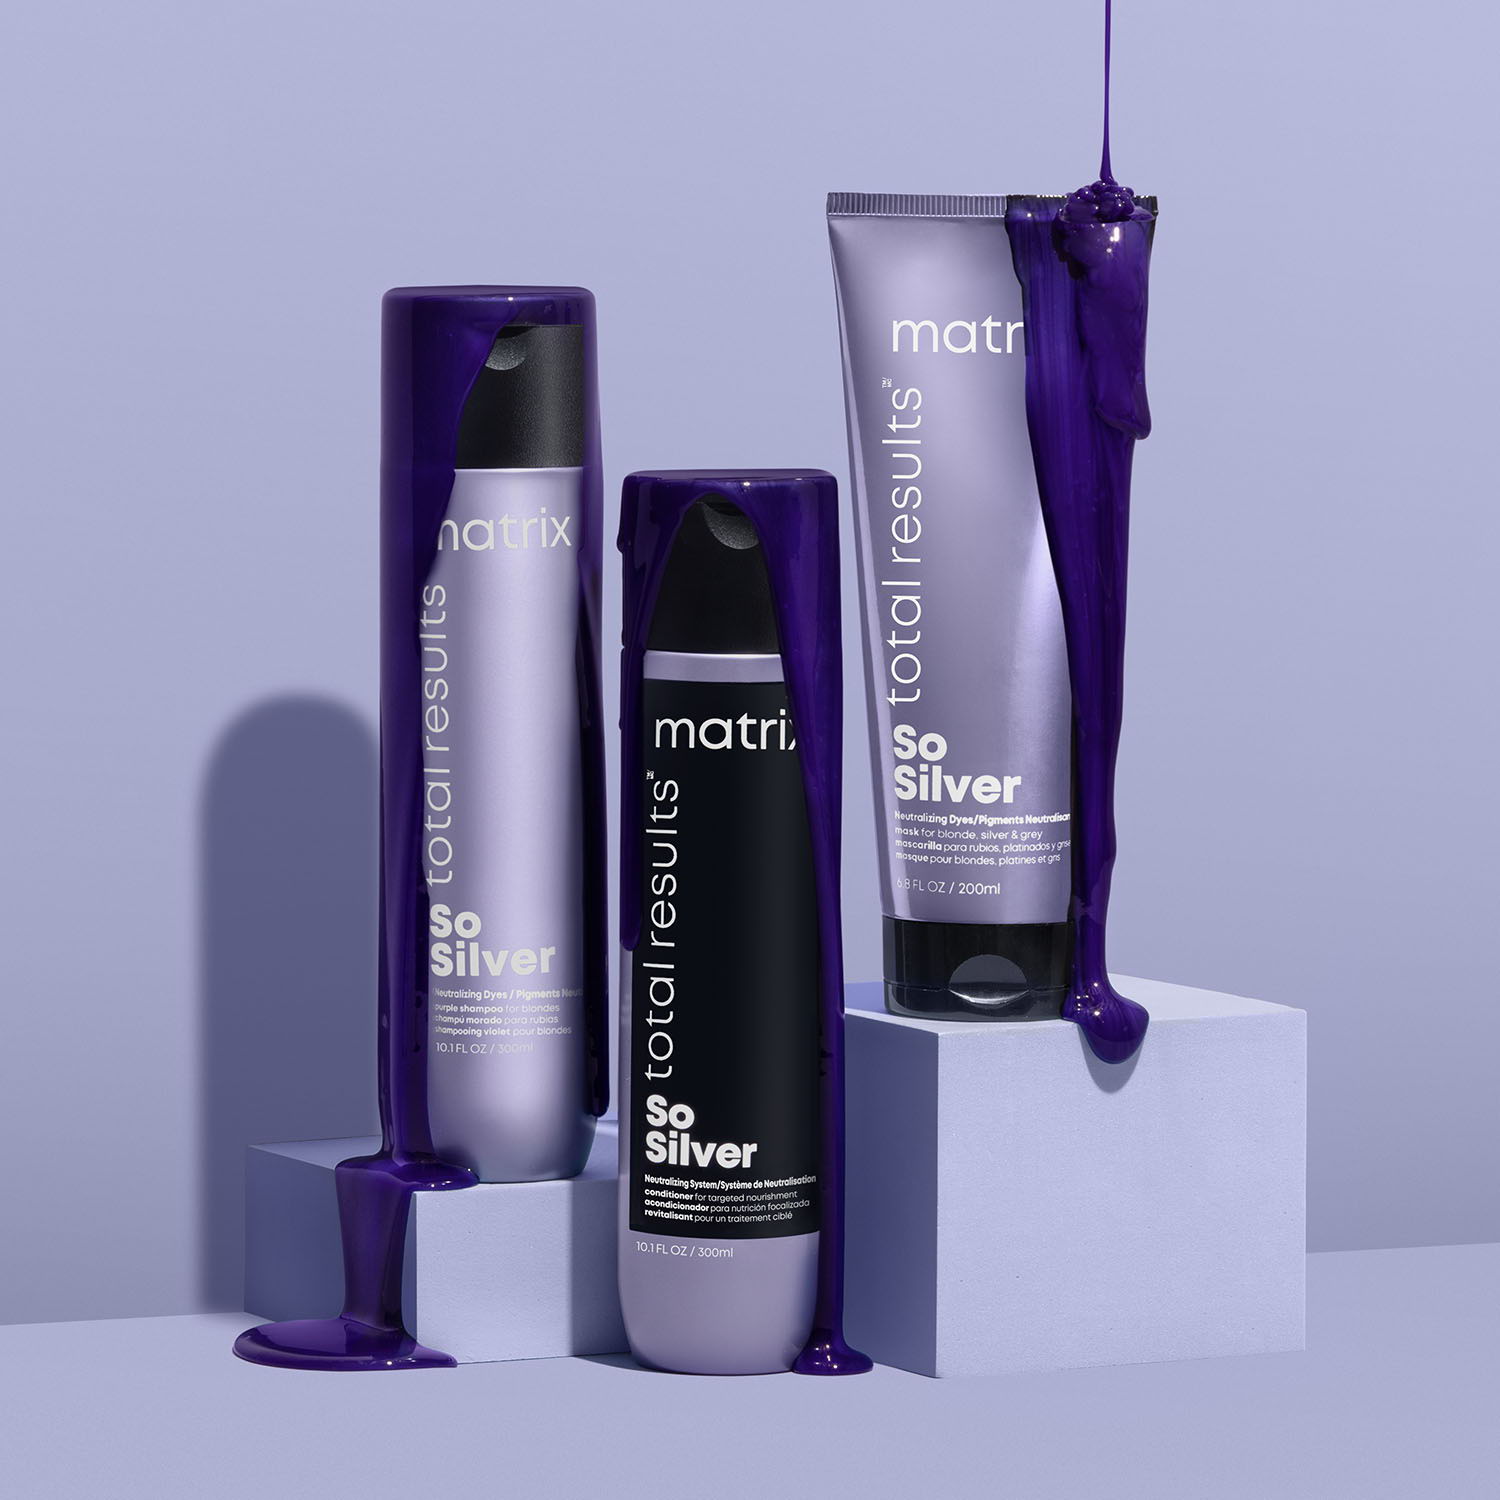 Total Results So Silver Shampoo €14,79*
Total Results So Silver Conditioner €14,79*
Total Results So Silver Mask €21,34*